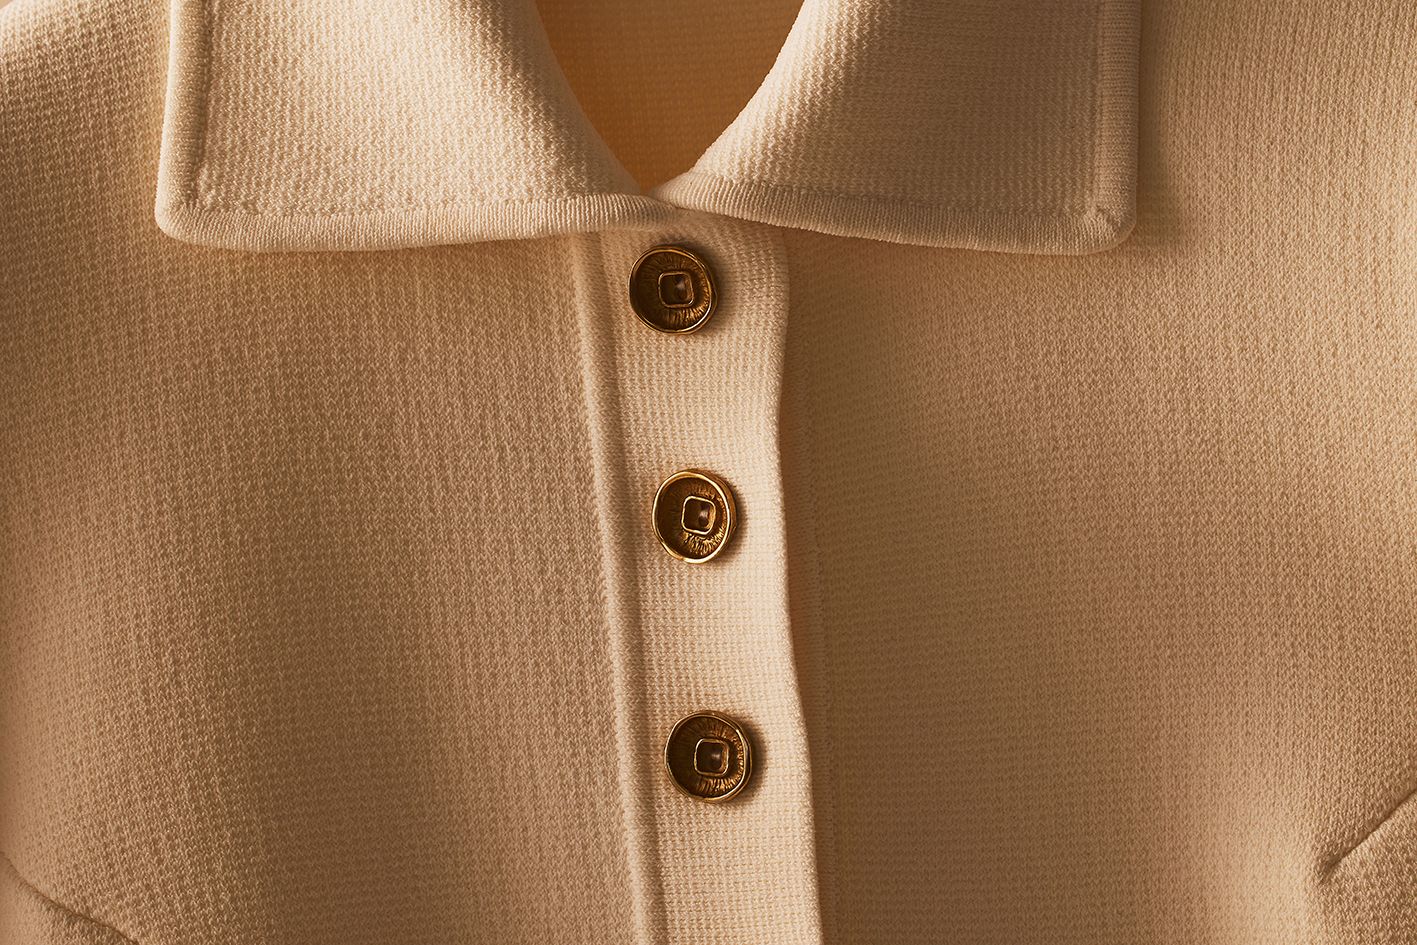 Scanlan Theodore crepe knit with close detailed view of collar and button detail.